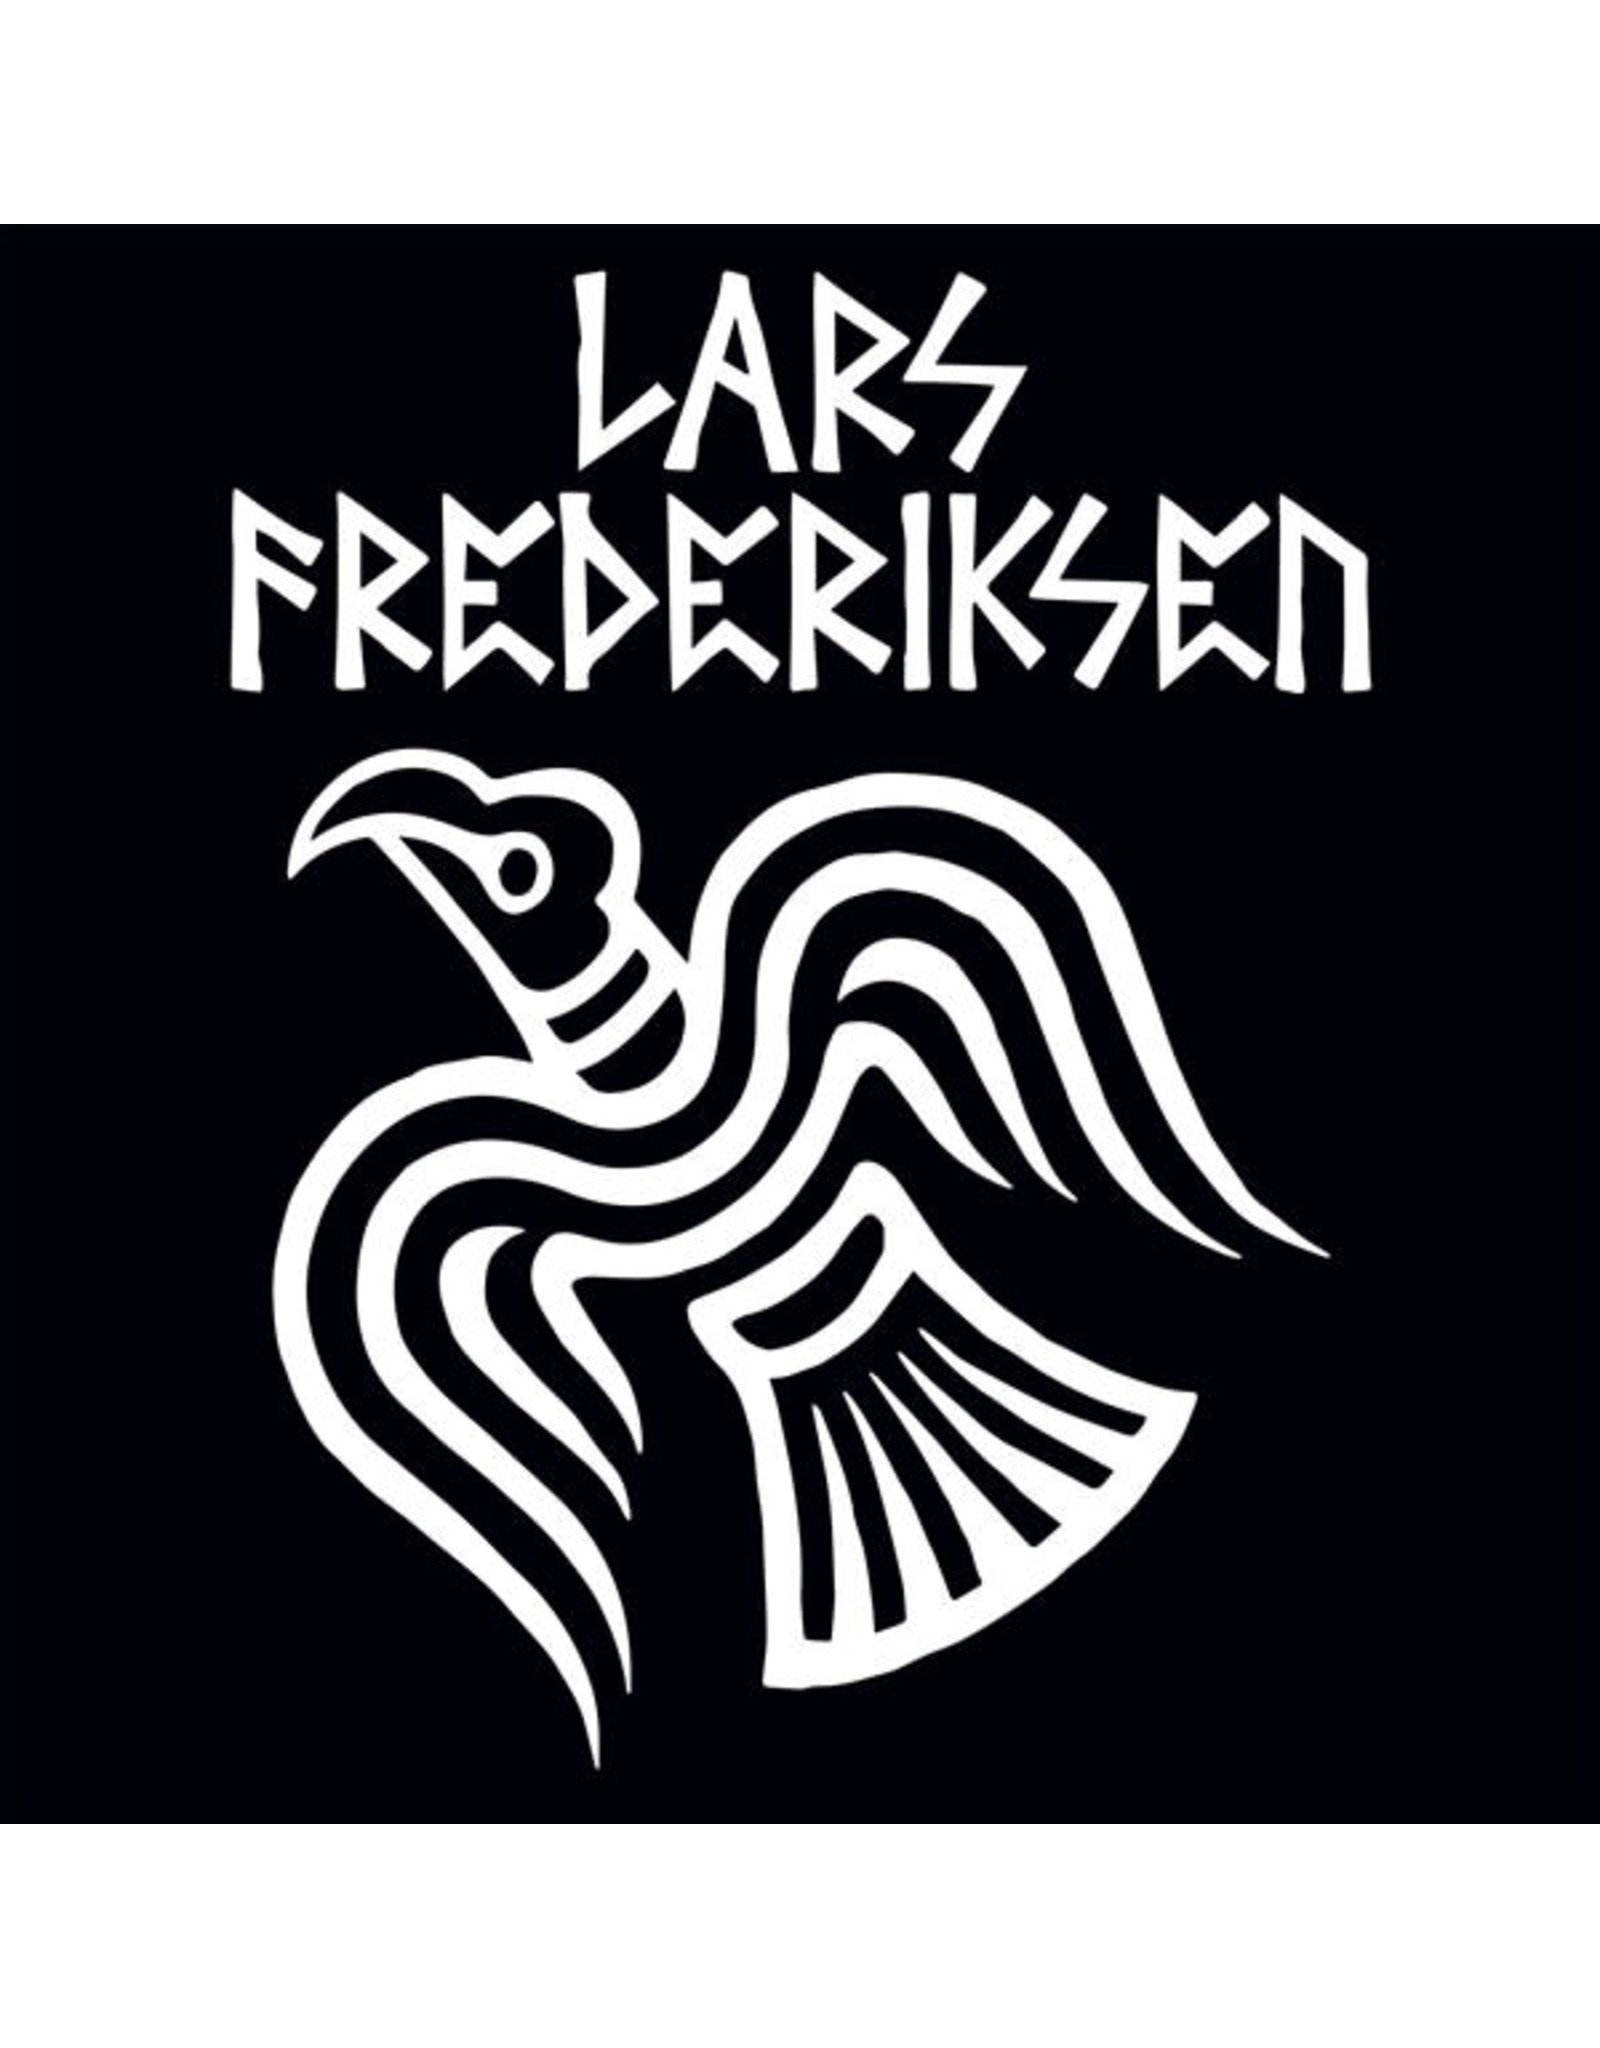 Frederiksen, Lars - To Victory CD